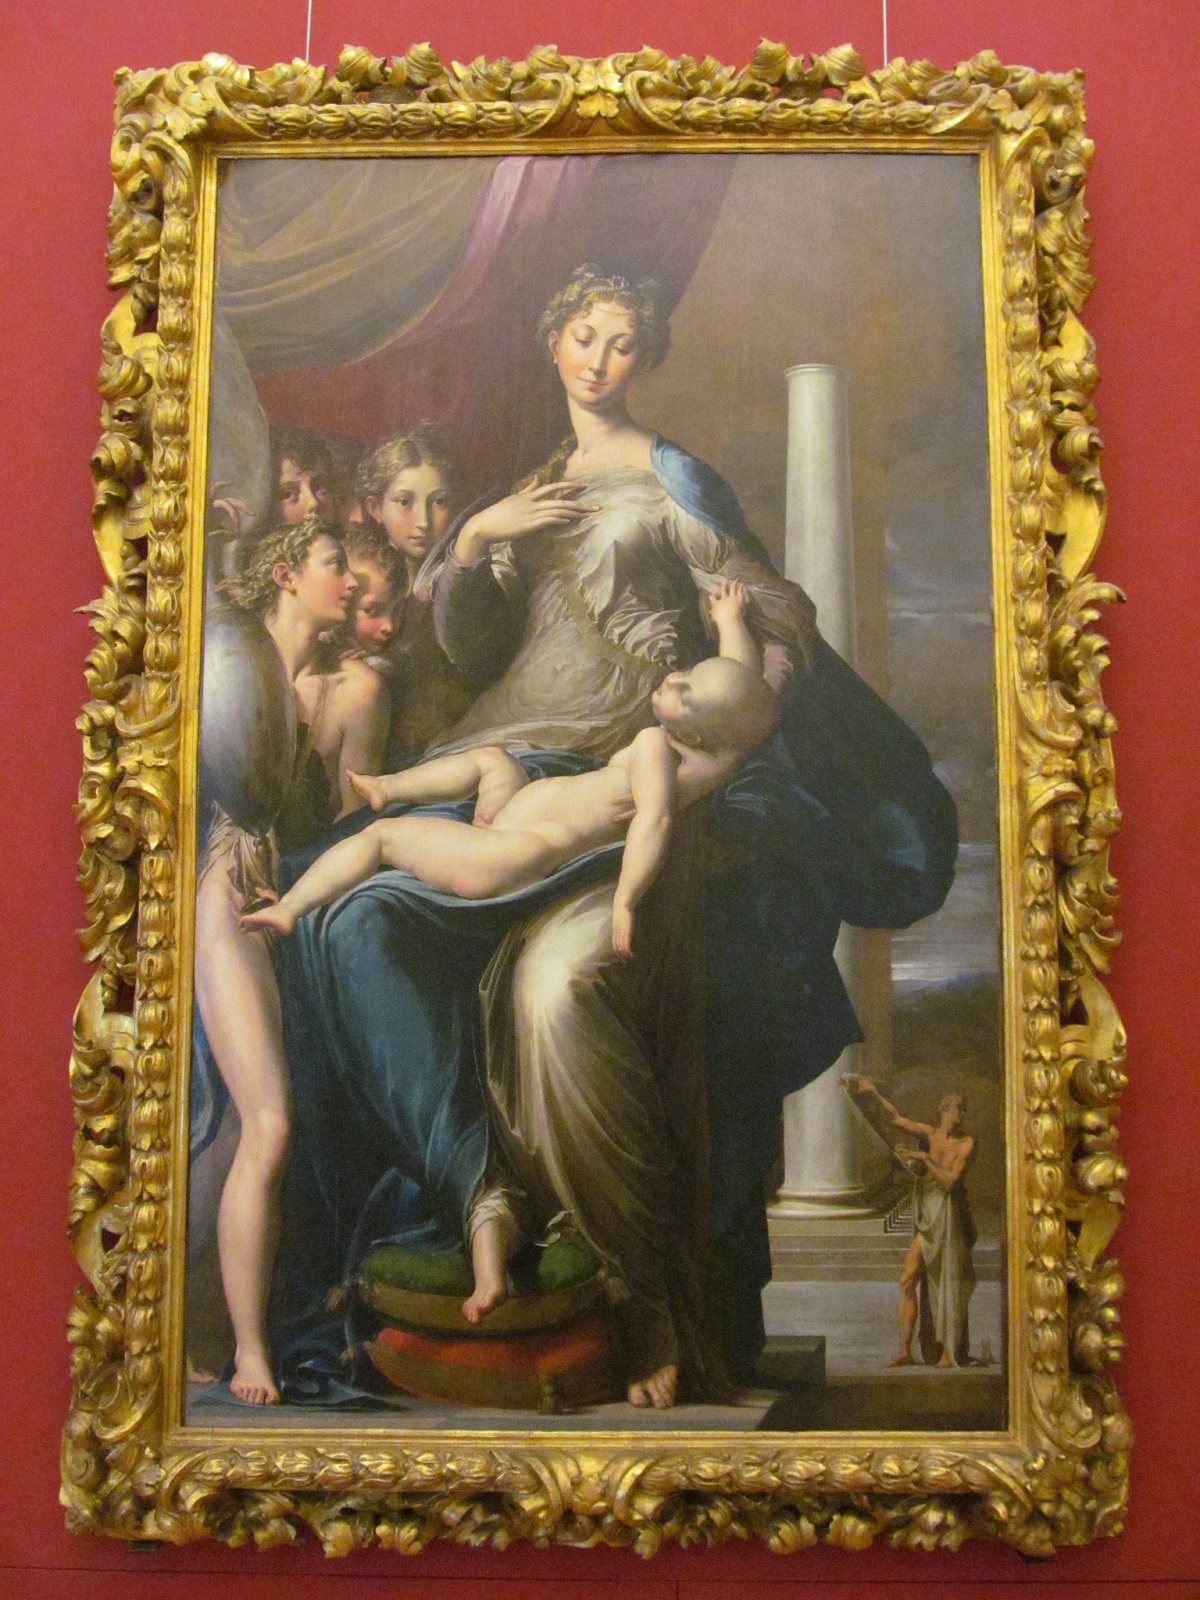 An oil painting in a golden frame of a woman with a long neck holding a strangely large baby